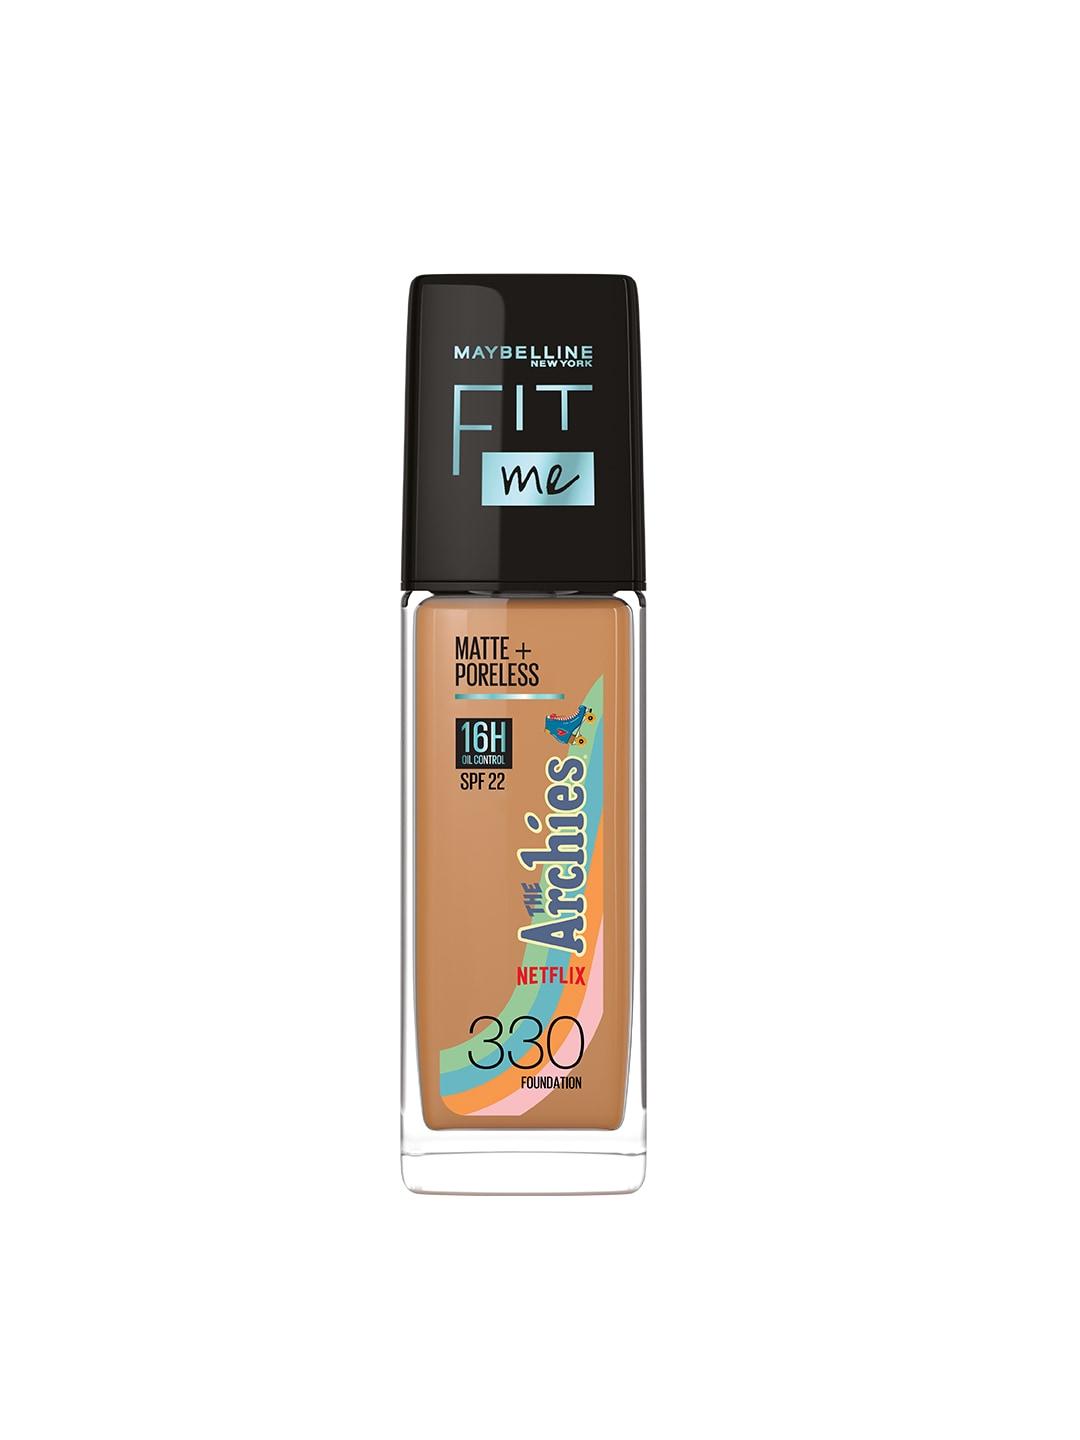 maybelline-new-york-the-archies-collection-fit-me-matte+poreless-foundation-30ml-shade-330